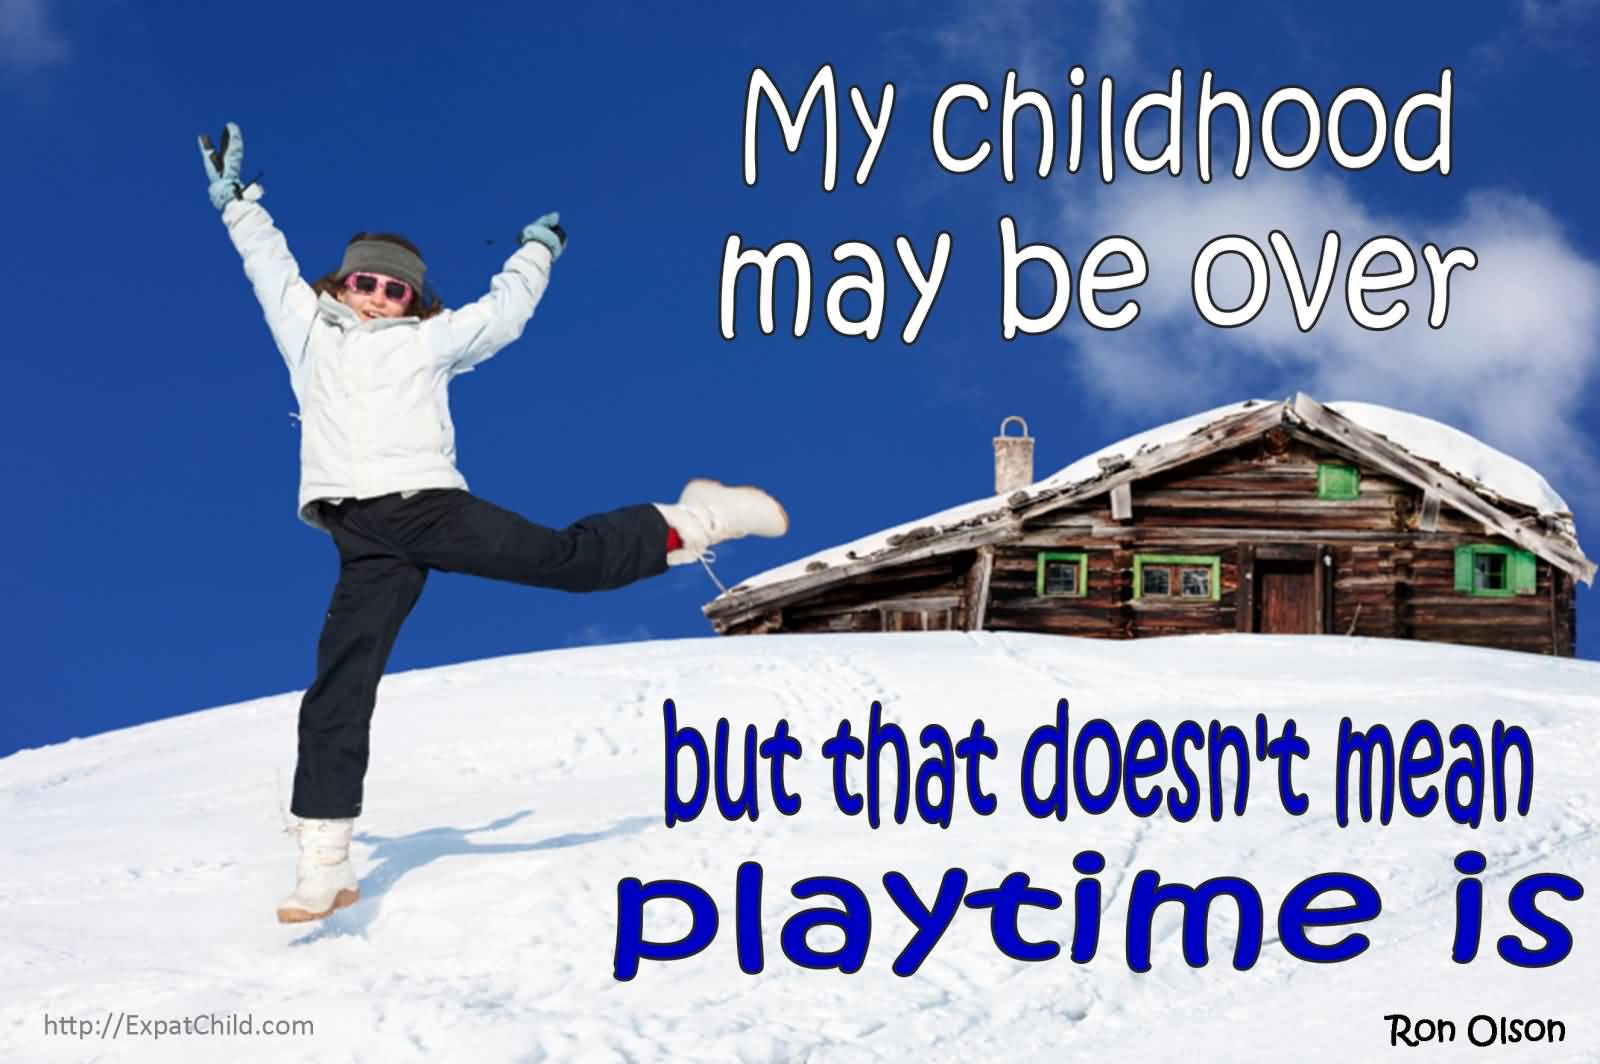 My childhood may be over, but that doesn’t mean playtime is.